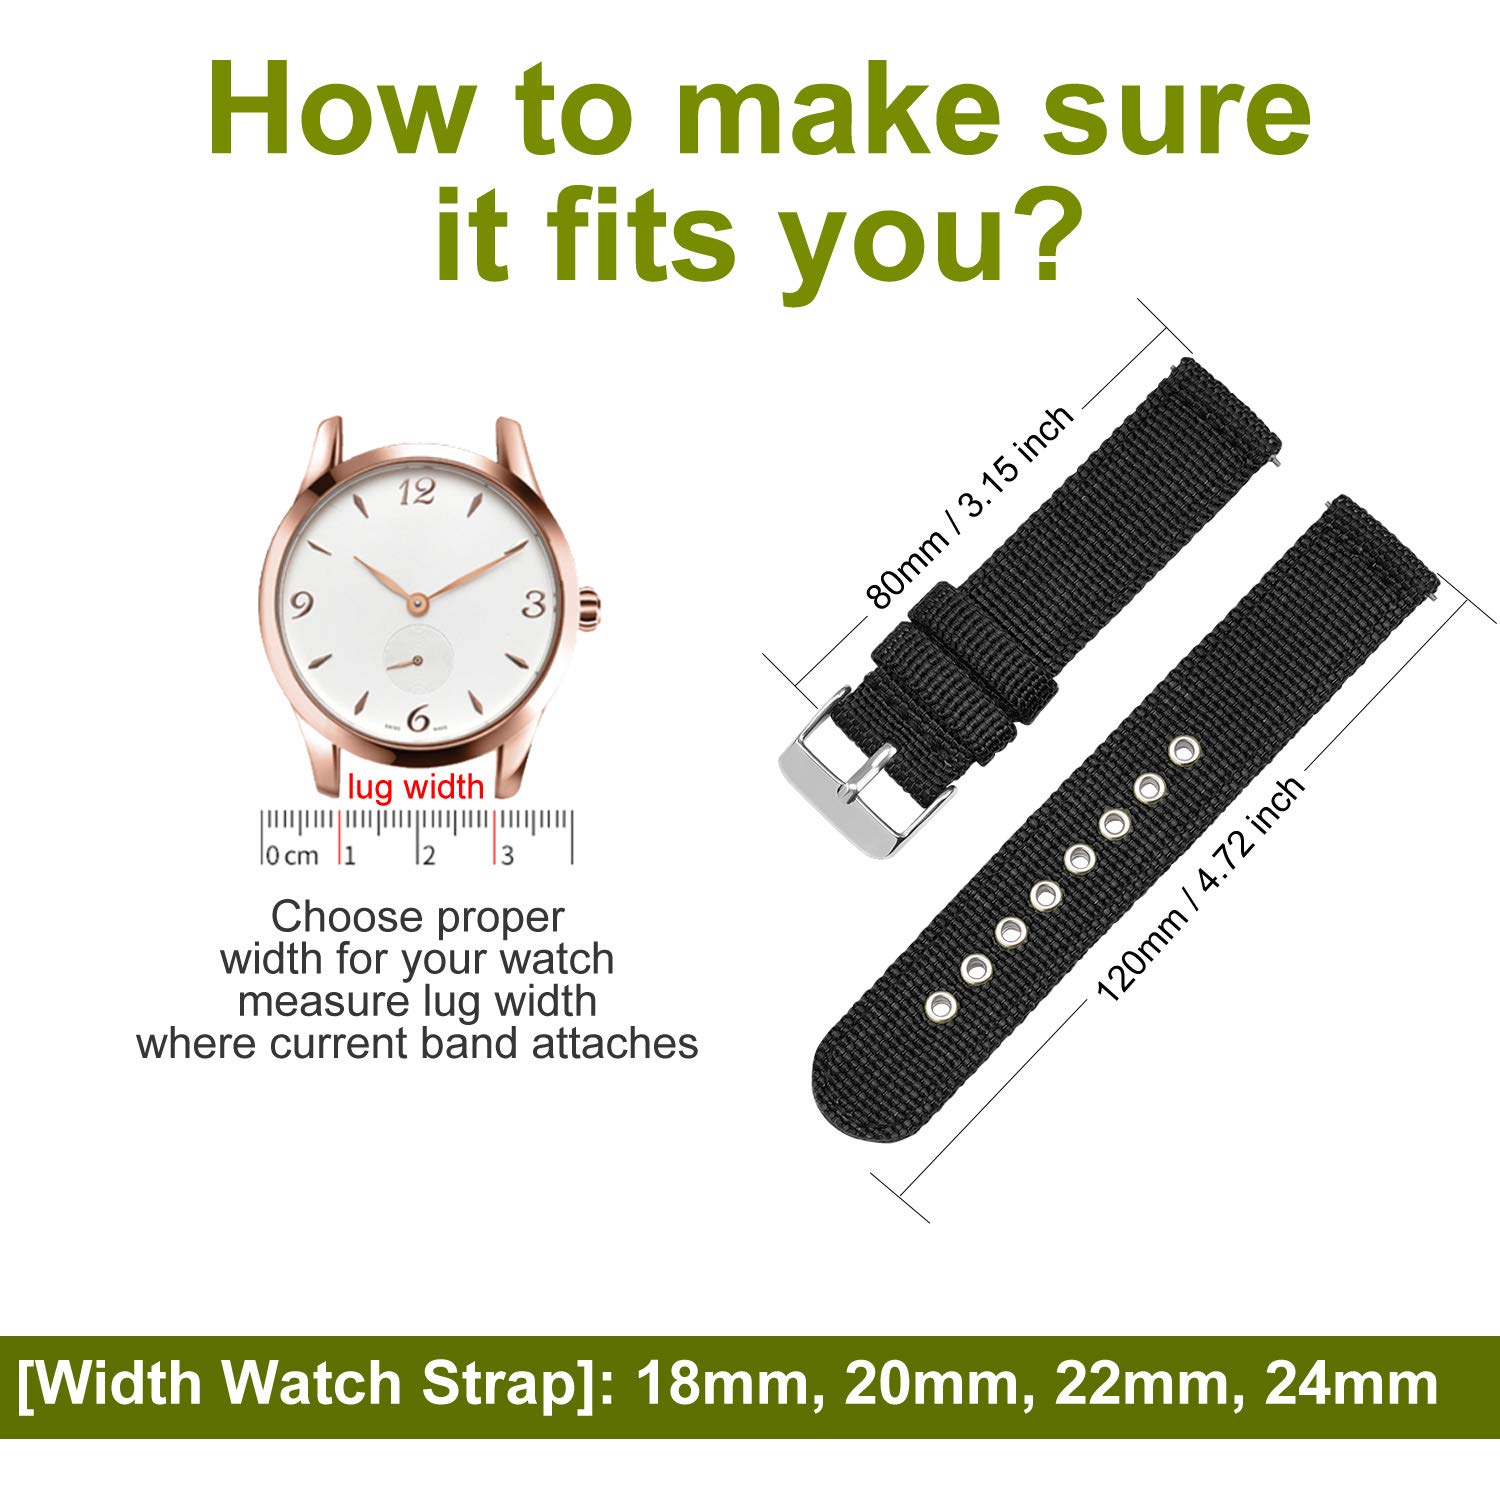 Ullchro Nylon Watch Strap Replacement Watch Band Military Army Men Women - 18mm, 20mm, 22mm, 24mm Watch Bracelet with Stainless Steel Silver Buckle